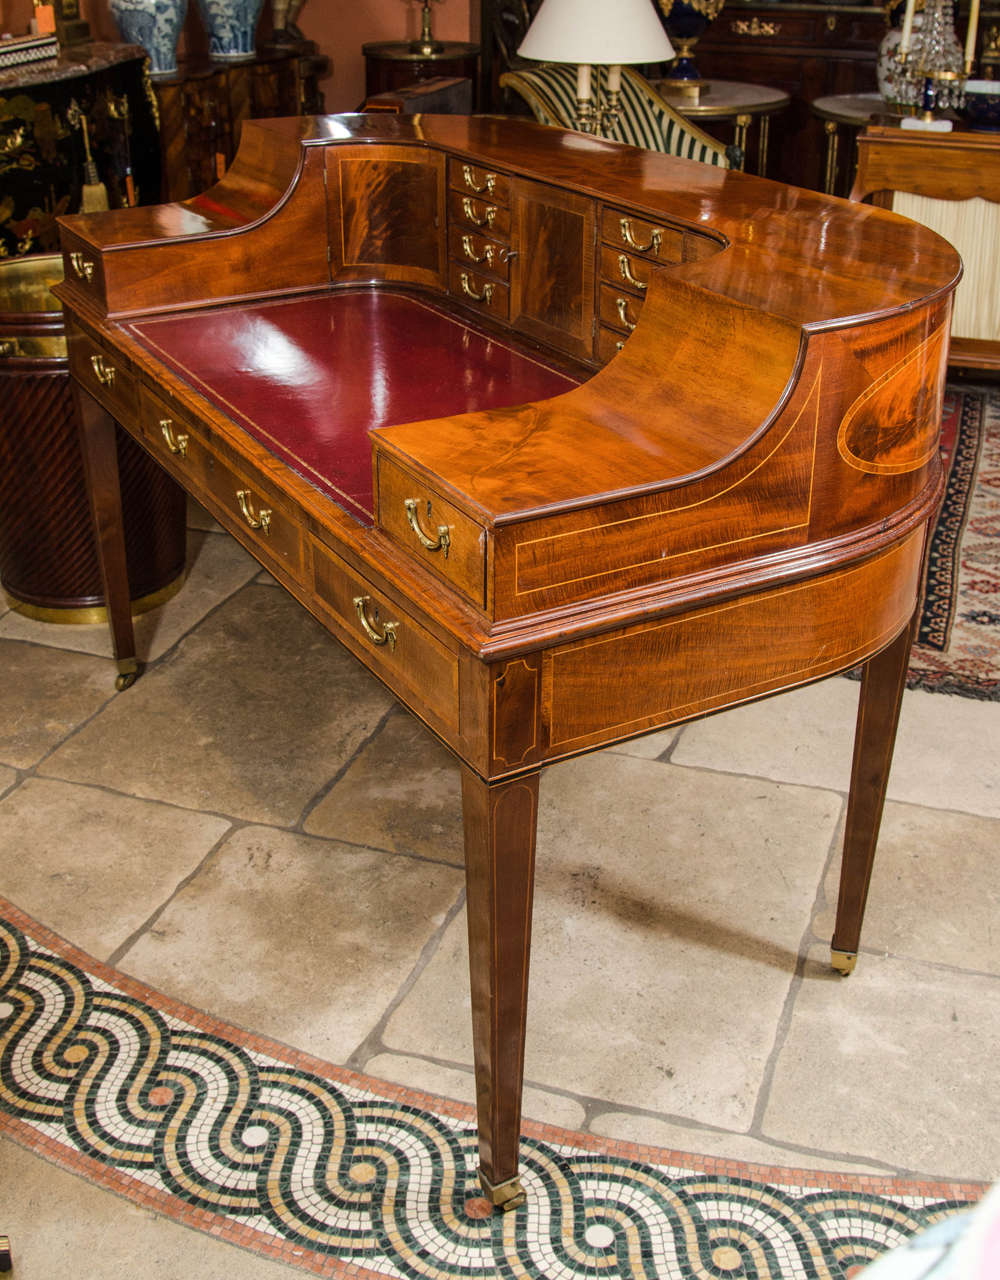 A George III style mahogany crossbanded and line inlaid Carlton House desk with an inset red leather writing surface, on tapering square legs ending in casters.